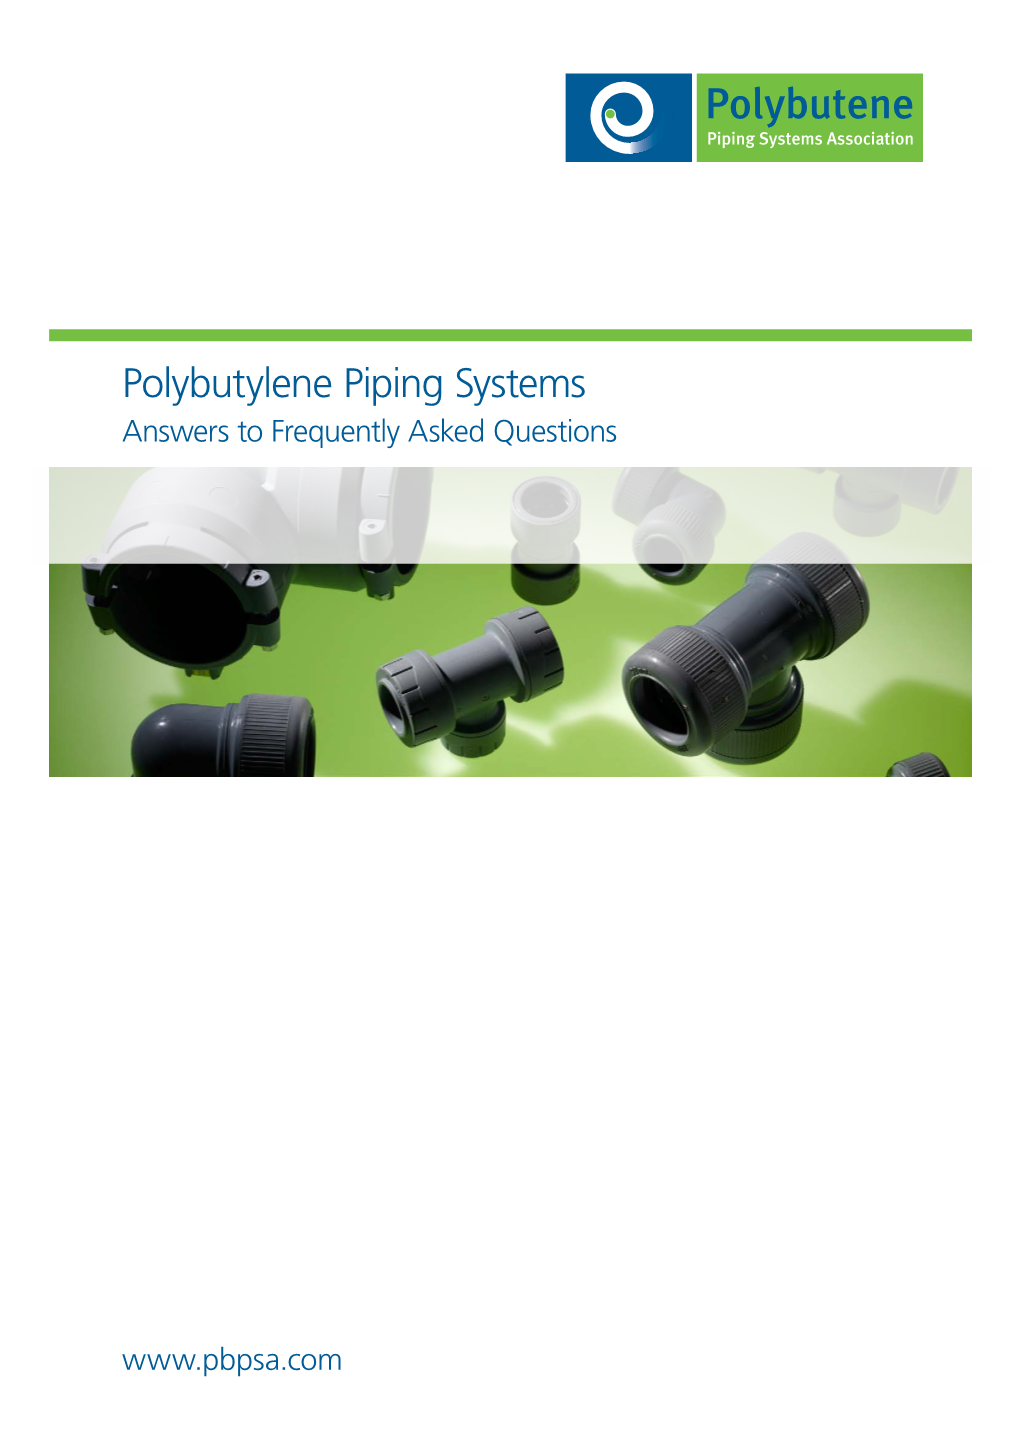 Polybutylene Piping Systems Answers to Frequently Asked Questions